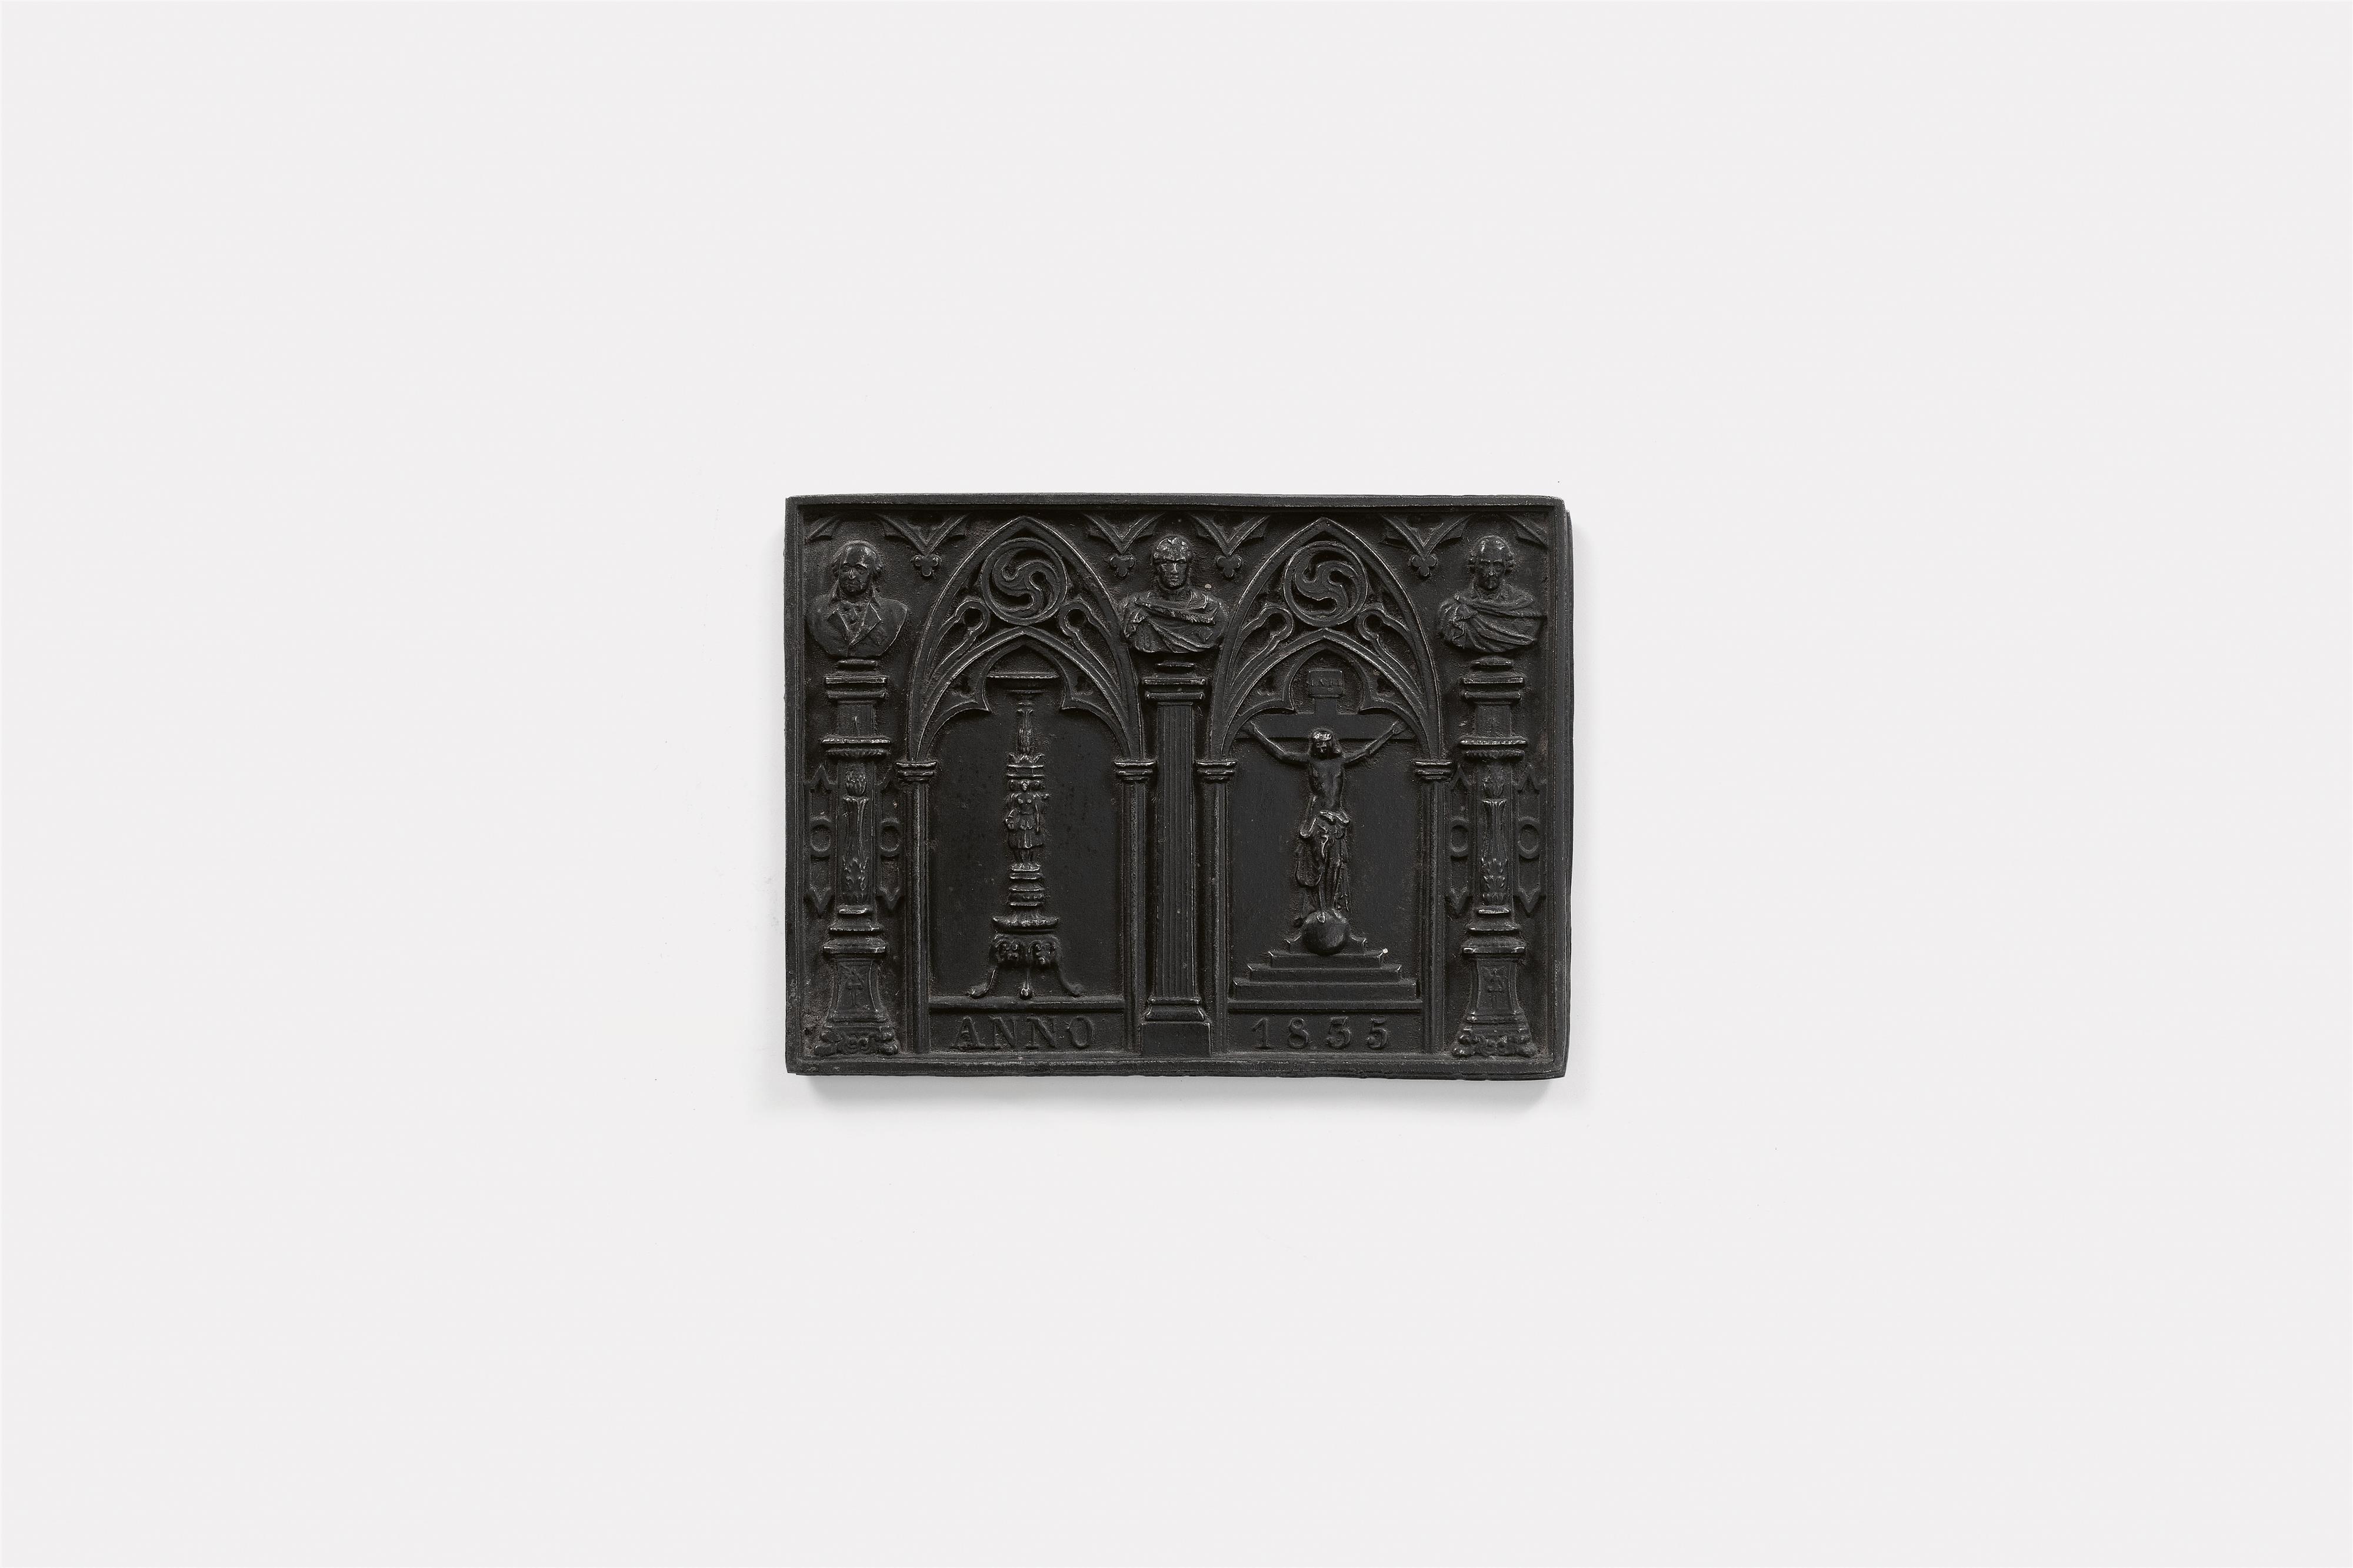 A cast iron New Year's plaque inscribed "ANNO 1835" - image-1